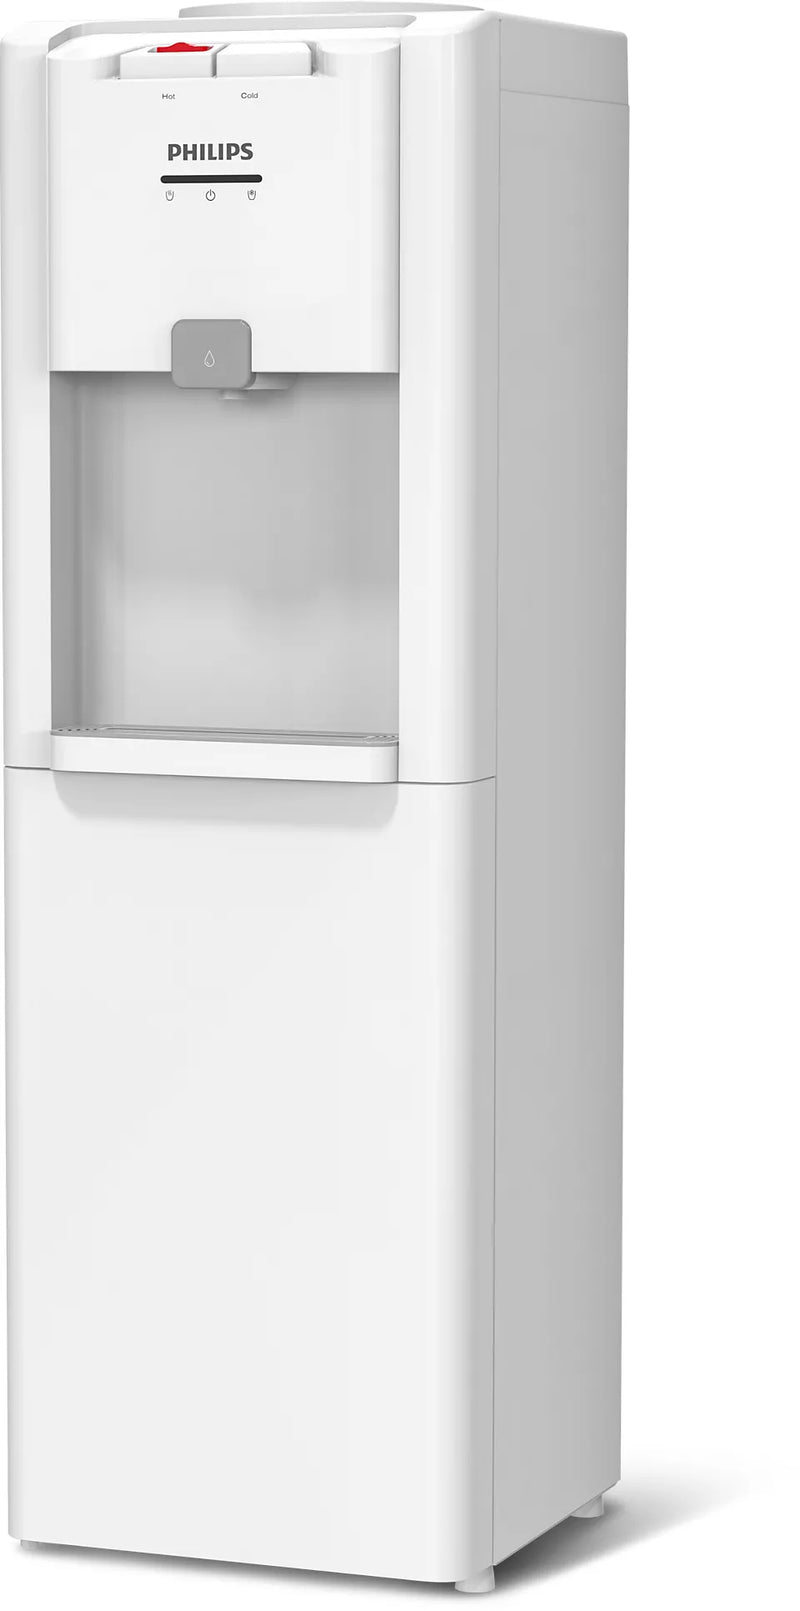 Philips hot/cold Water Dispenser 